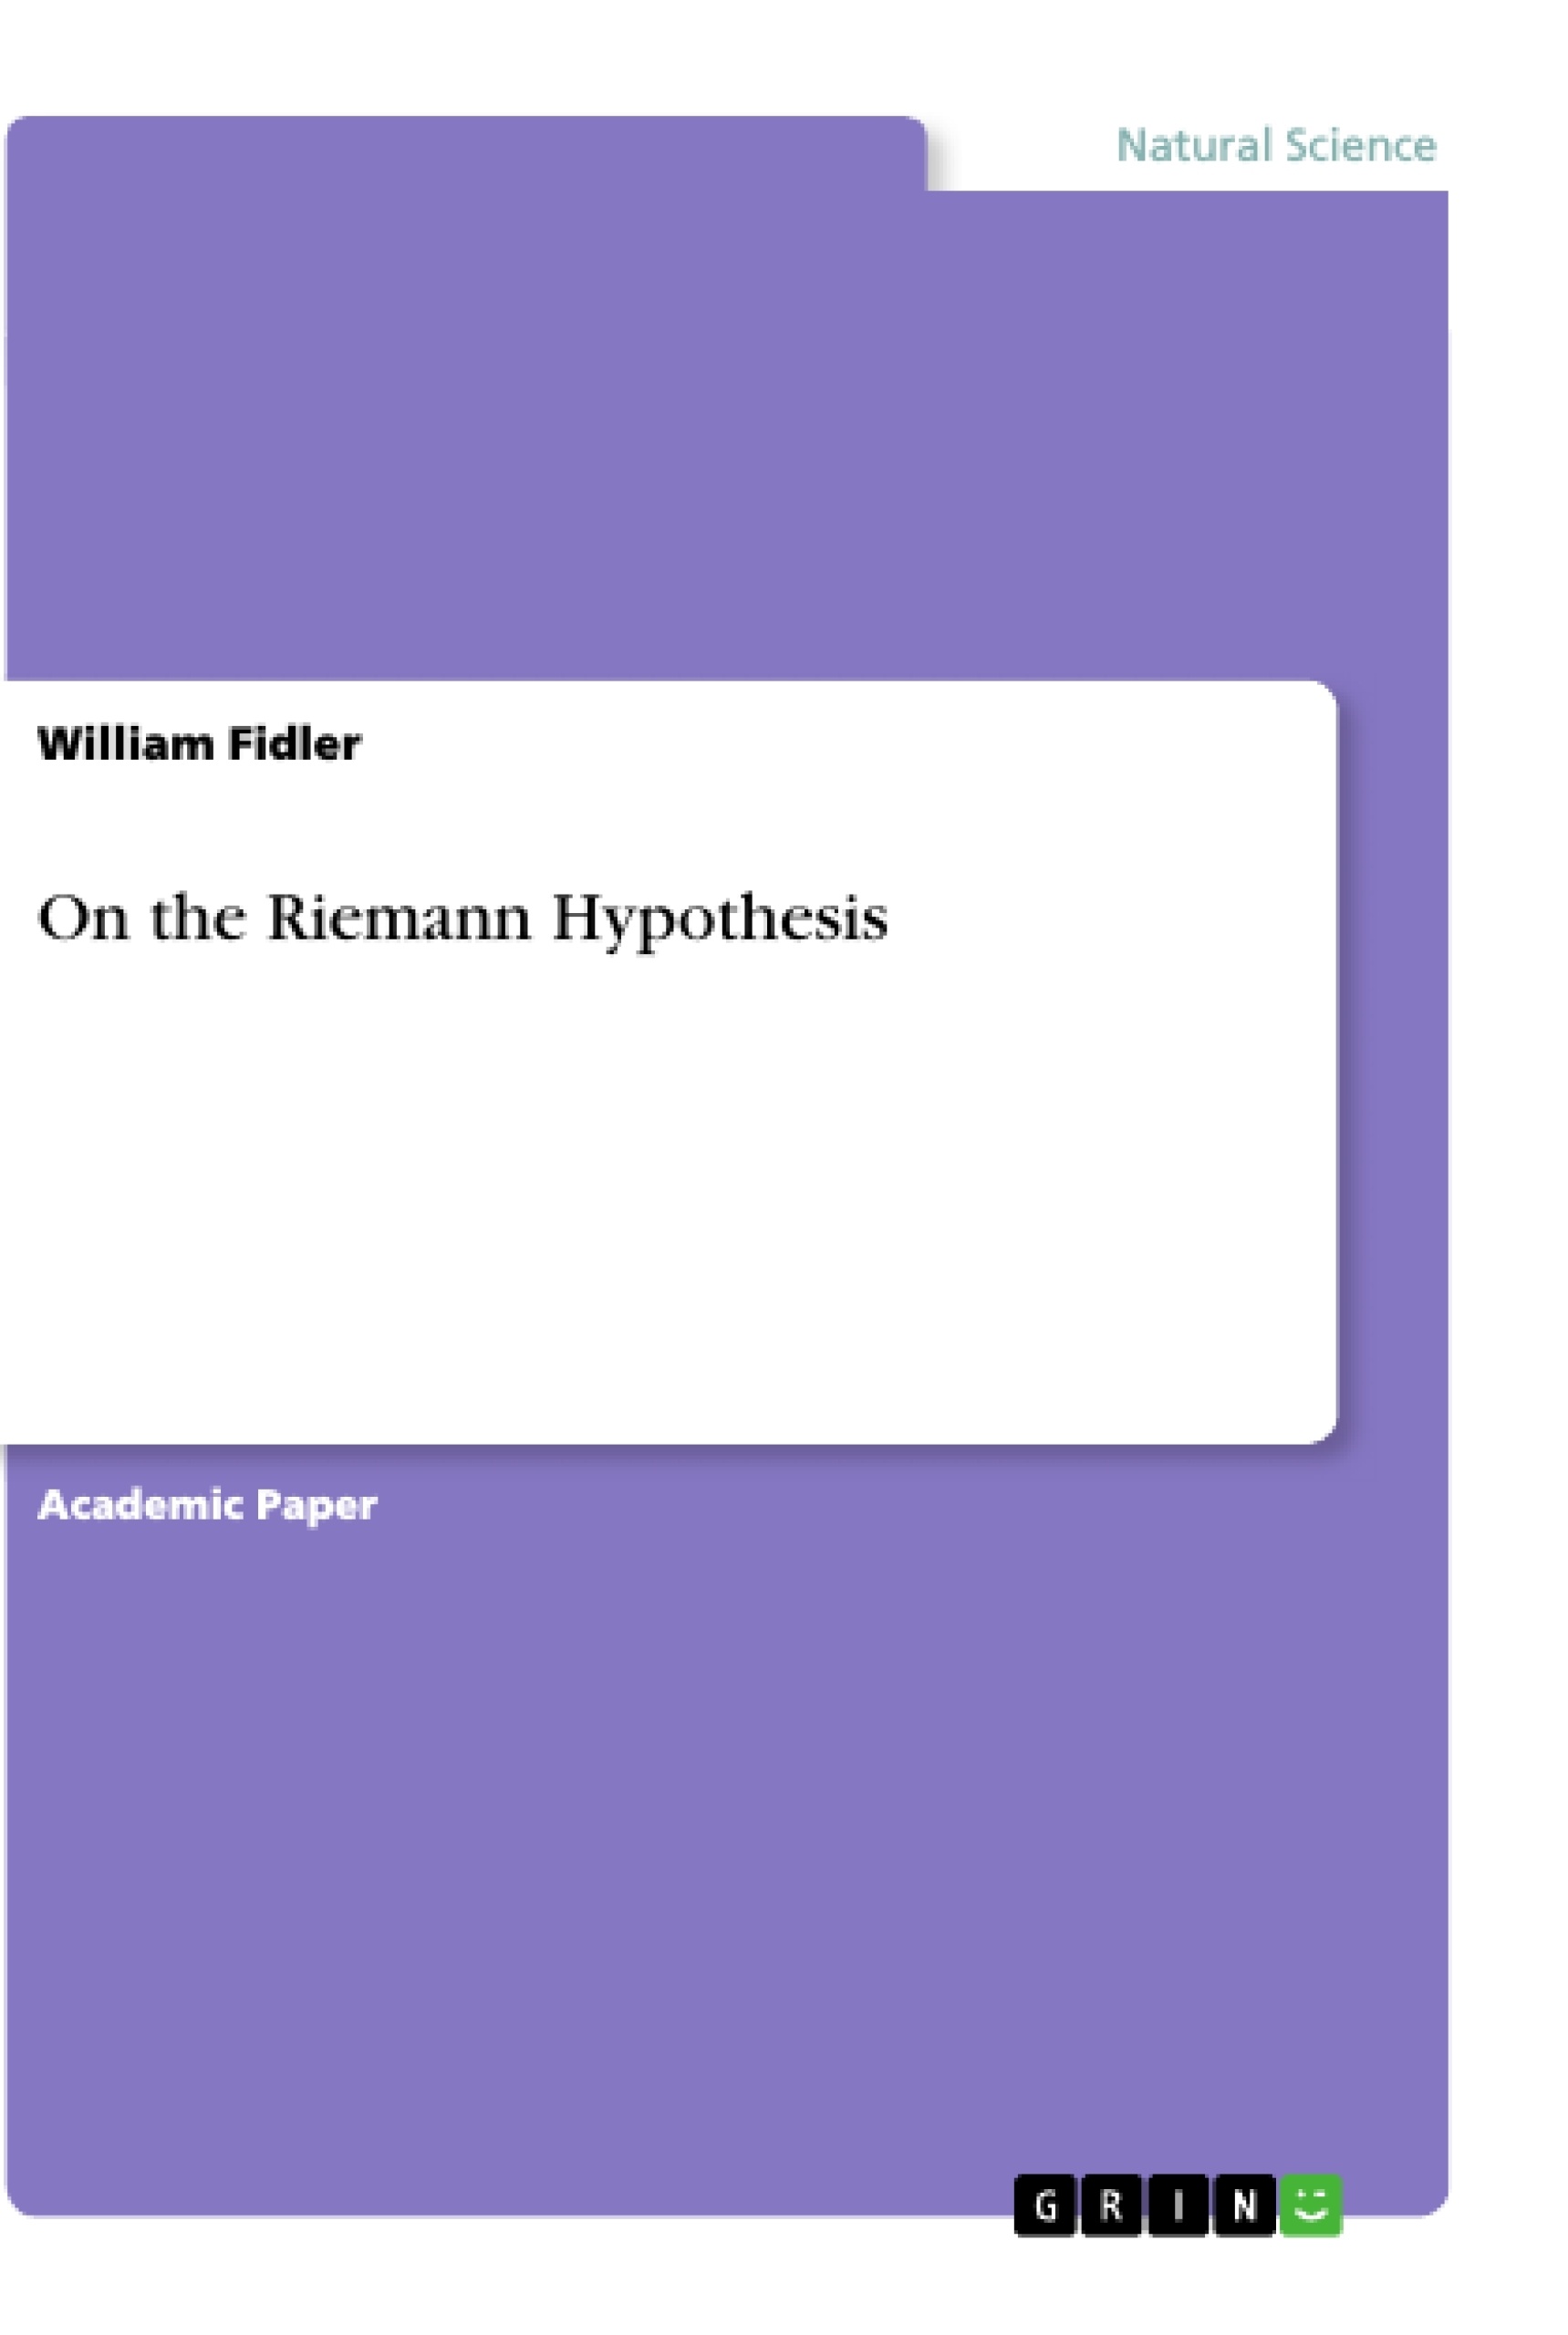 Title: On the Riemann Hypothesis